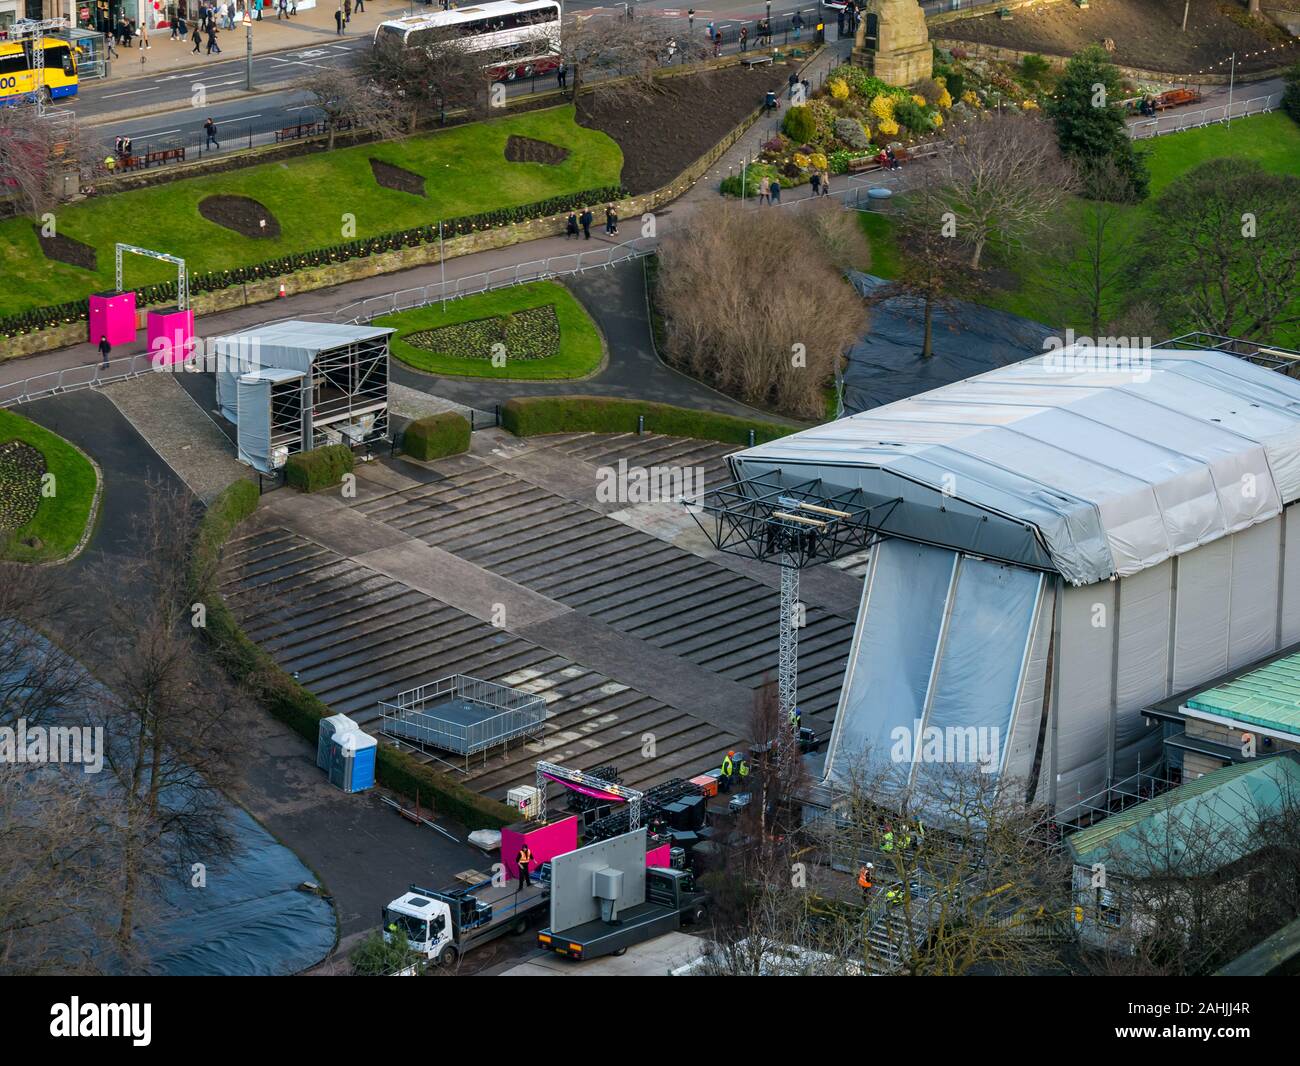 Preparations for Hogmanay street party event, Ross Bandstand, Princes Street Gardens, Edinburgh, Scotland, UK seen from above Stock Photo